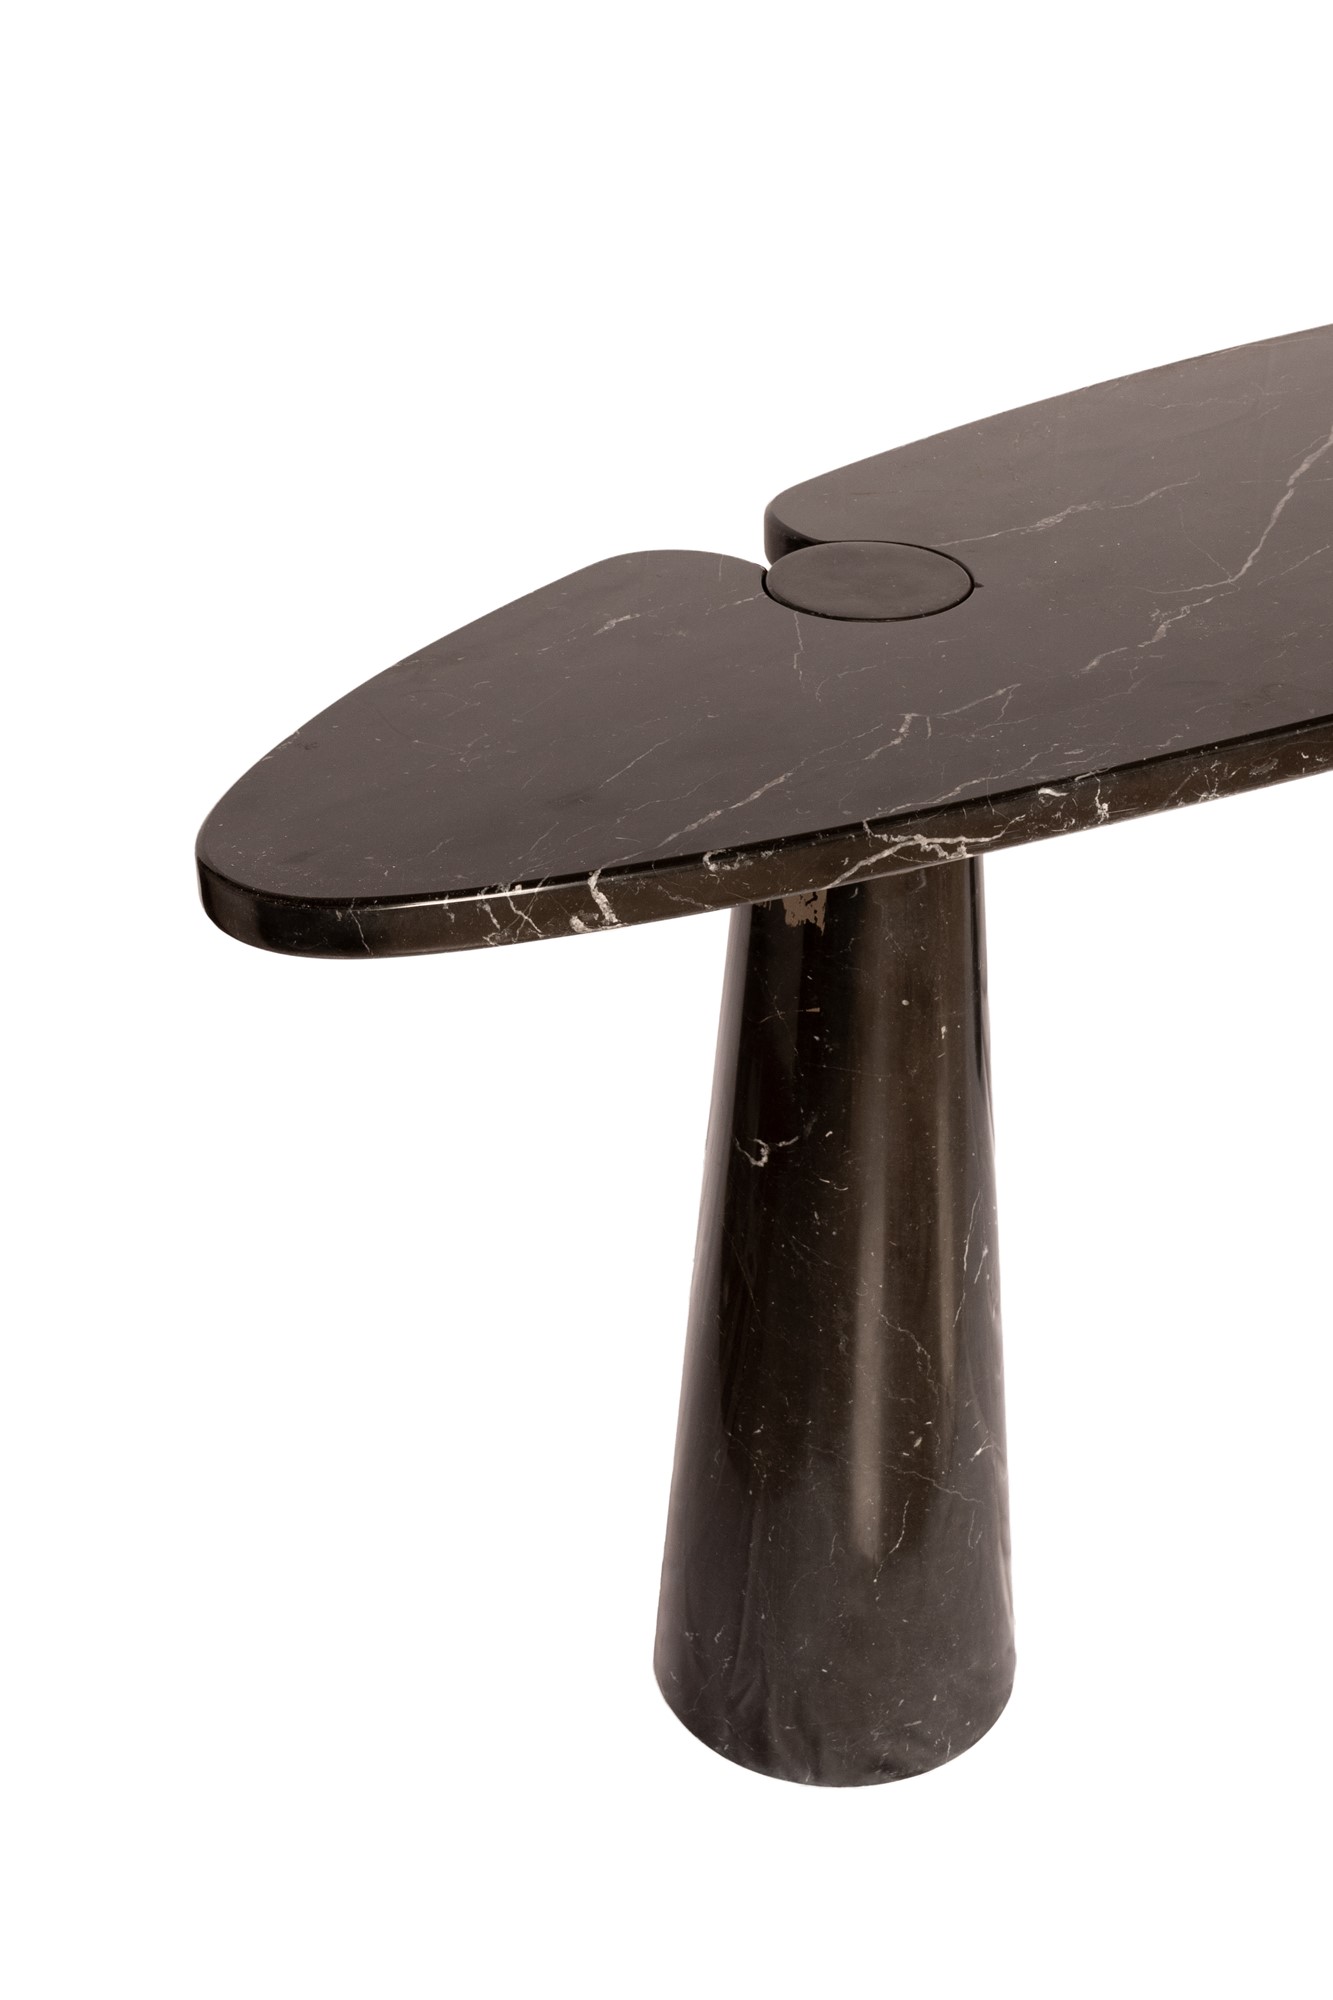 Angelo Mangiarotti Black marble console table by Marquina from the Eros series - Image 23 of 27